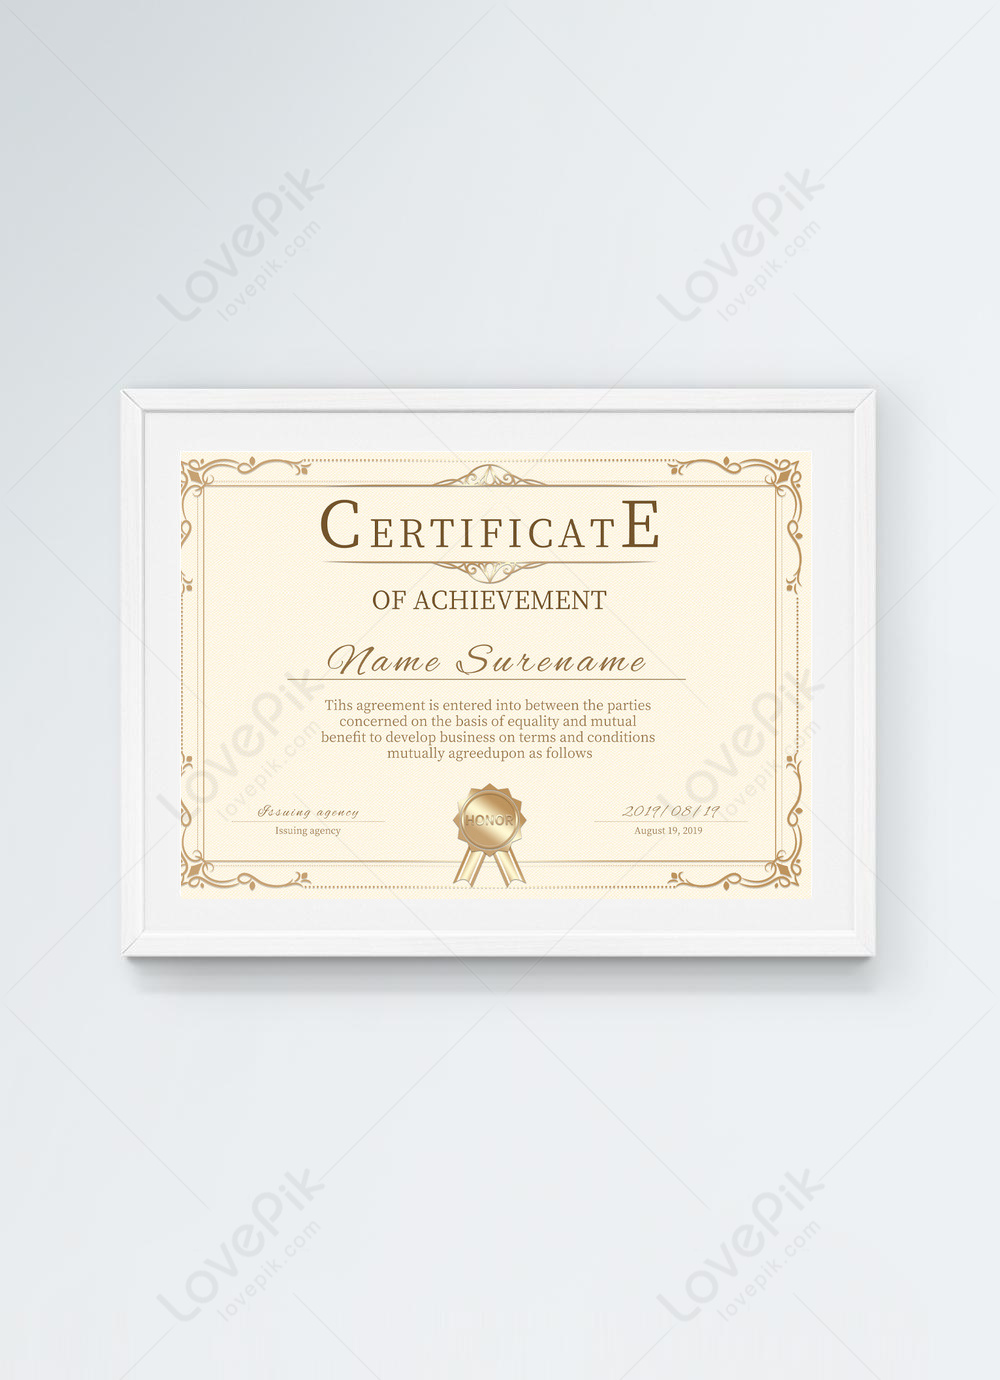 Golden certificate mockup template psd material issuing qualification ...